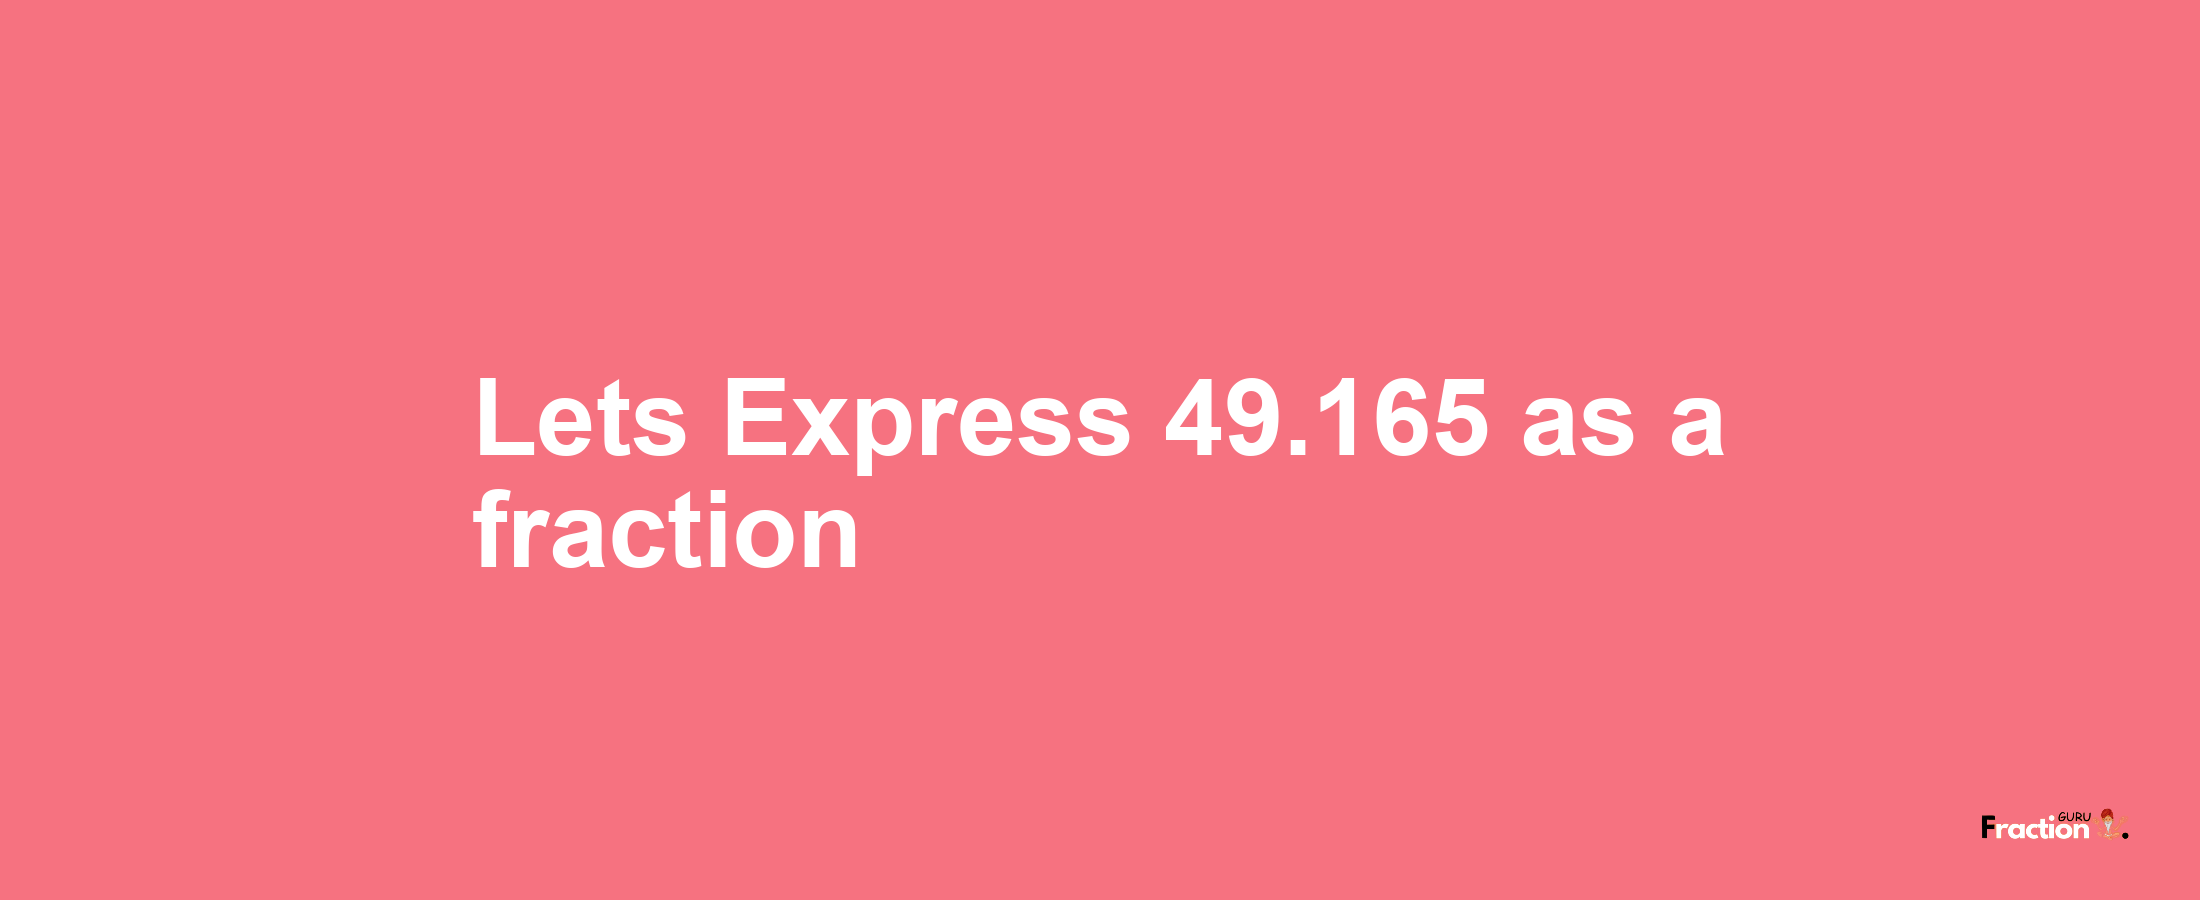 Lets Express 49.165 as afraction